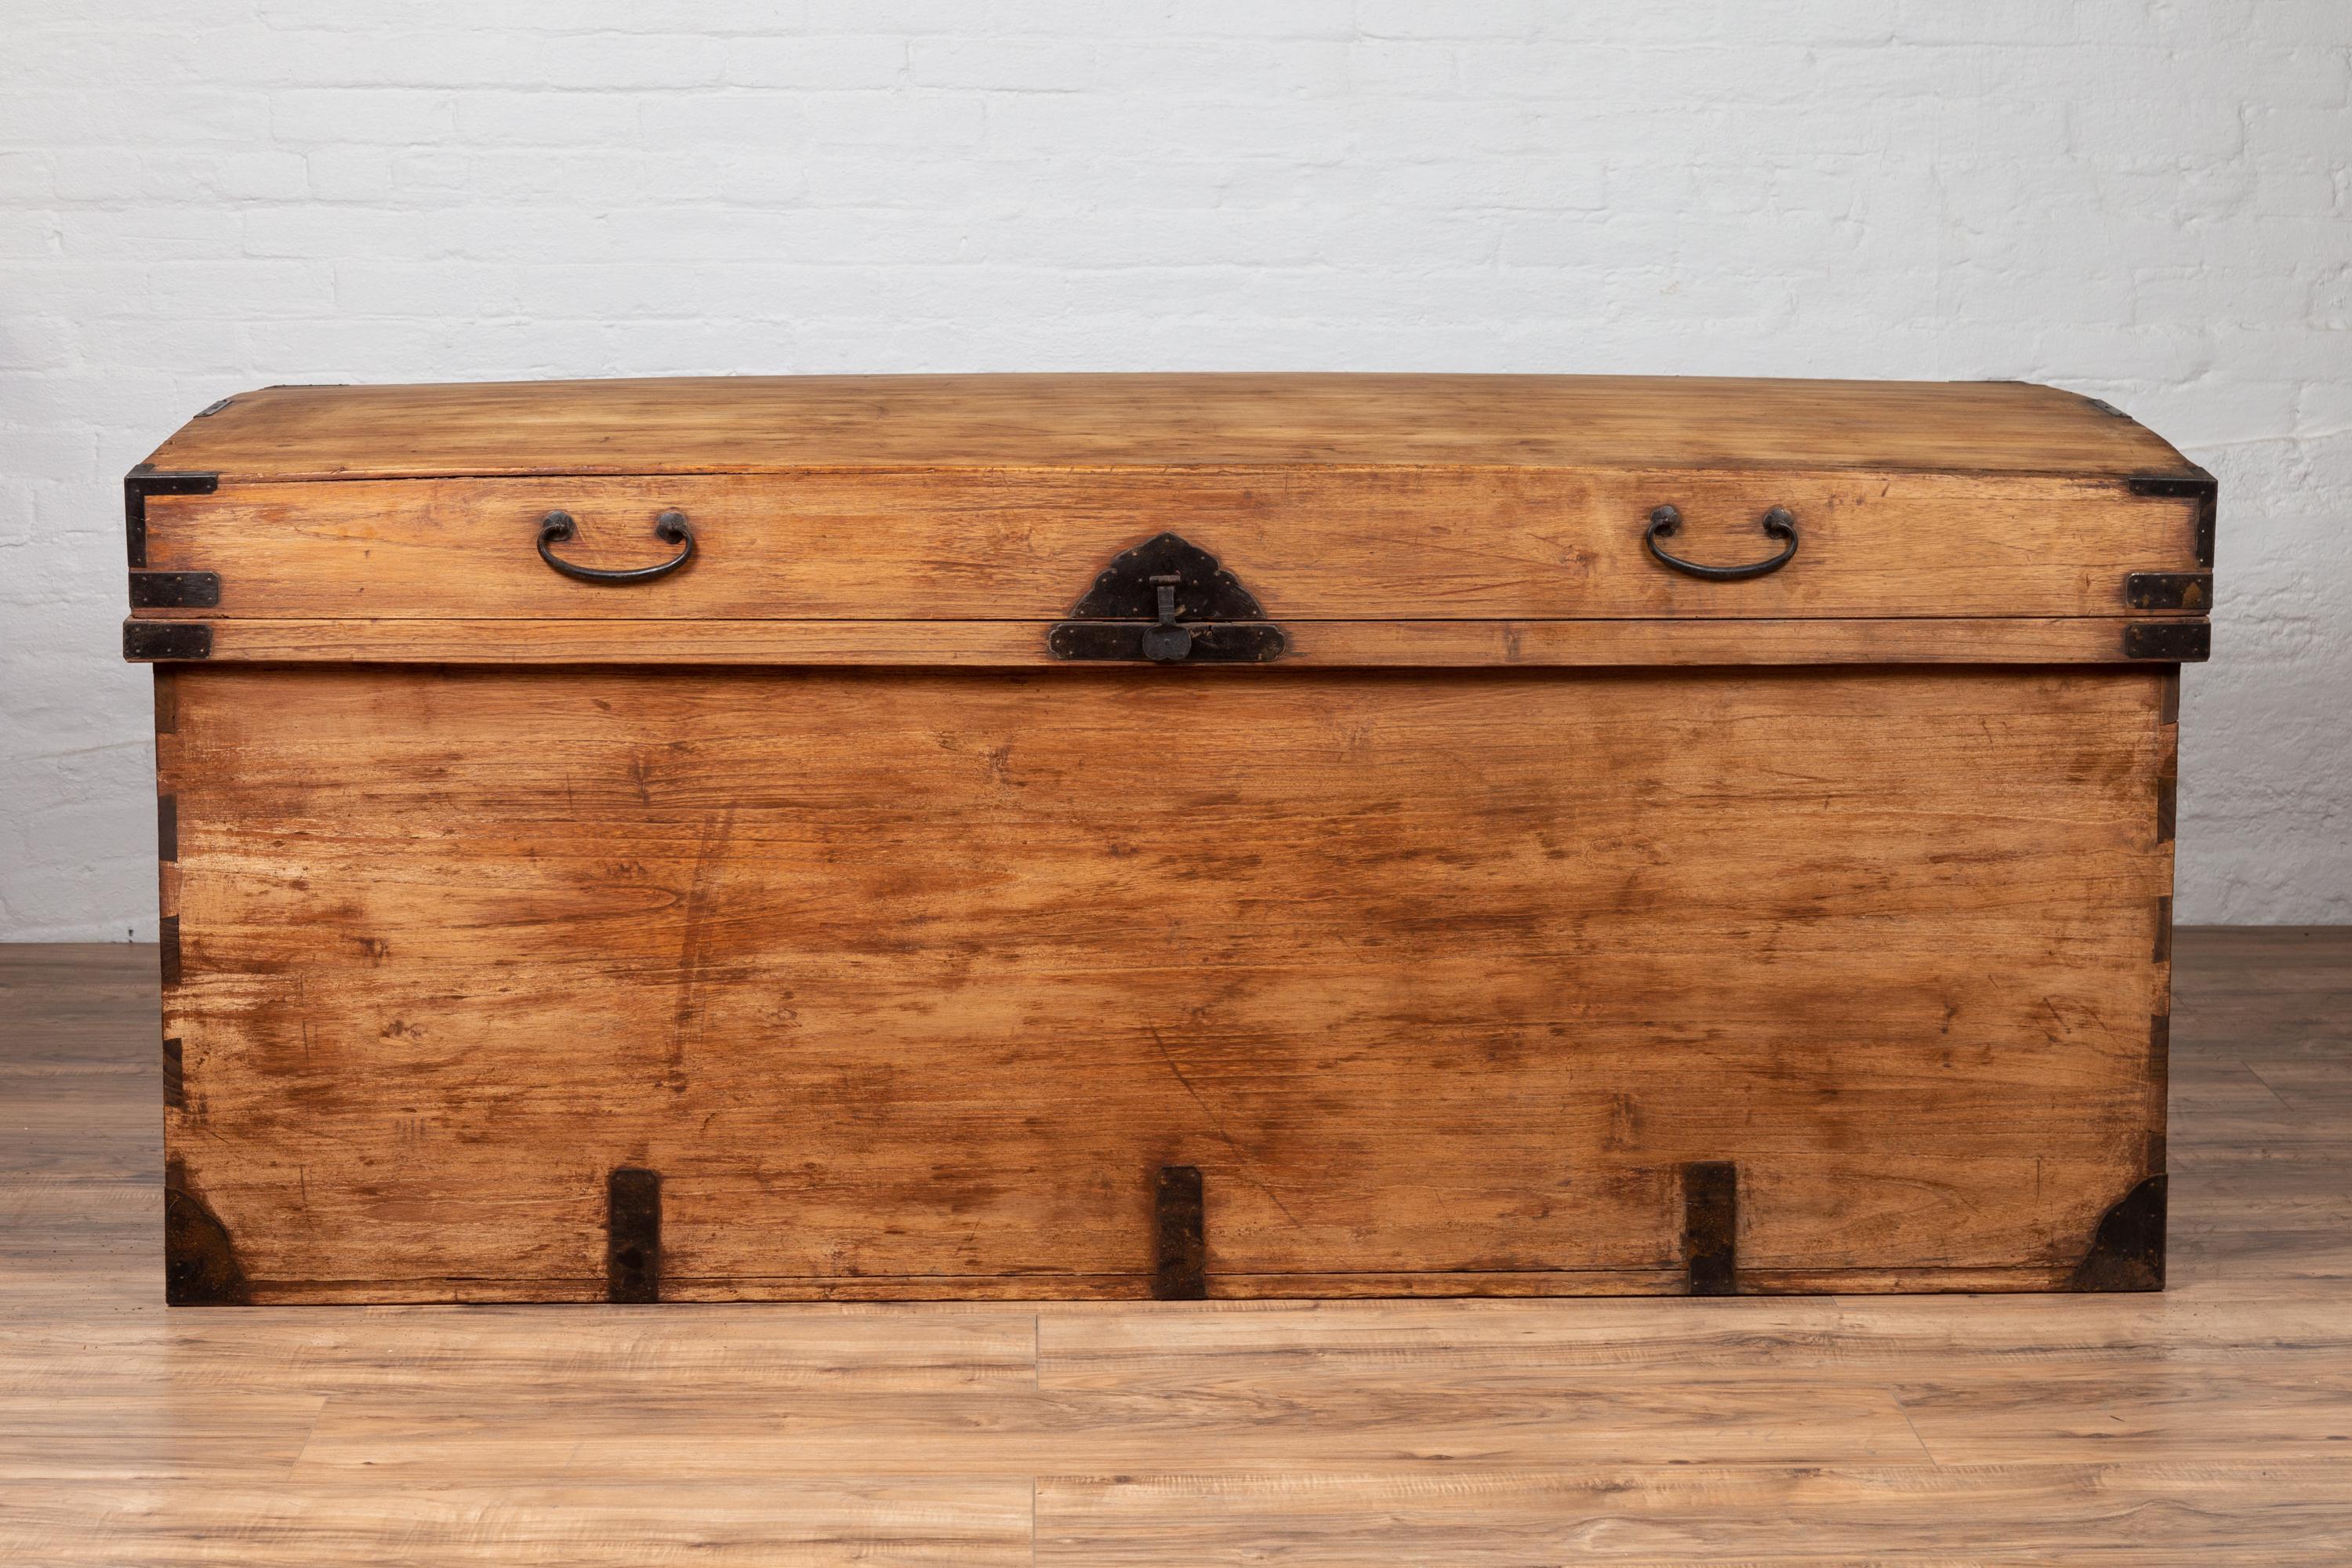 An antique Japanese large kimono storage chest from the early 20th century, with iron cut hardware and dovetail construction. Born in Japan during the early years of the 20th century, this stunning large kimono chest is a rare find! Presenting a